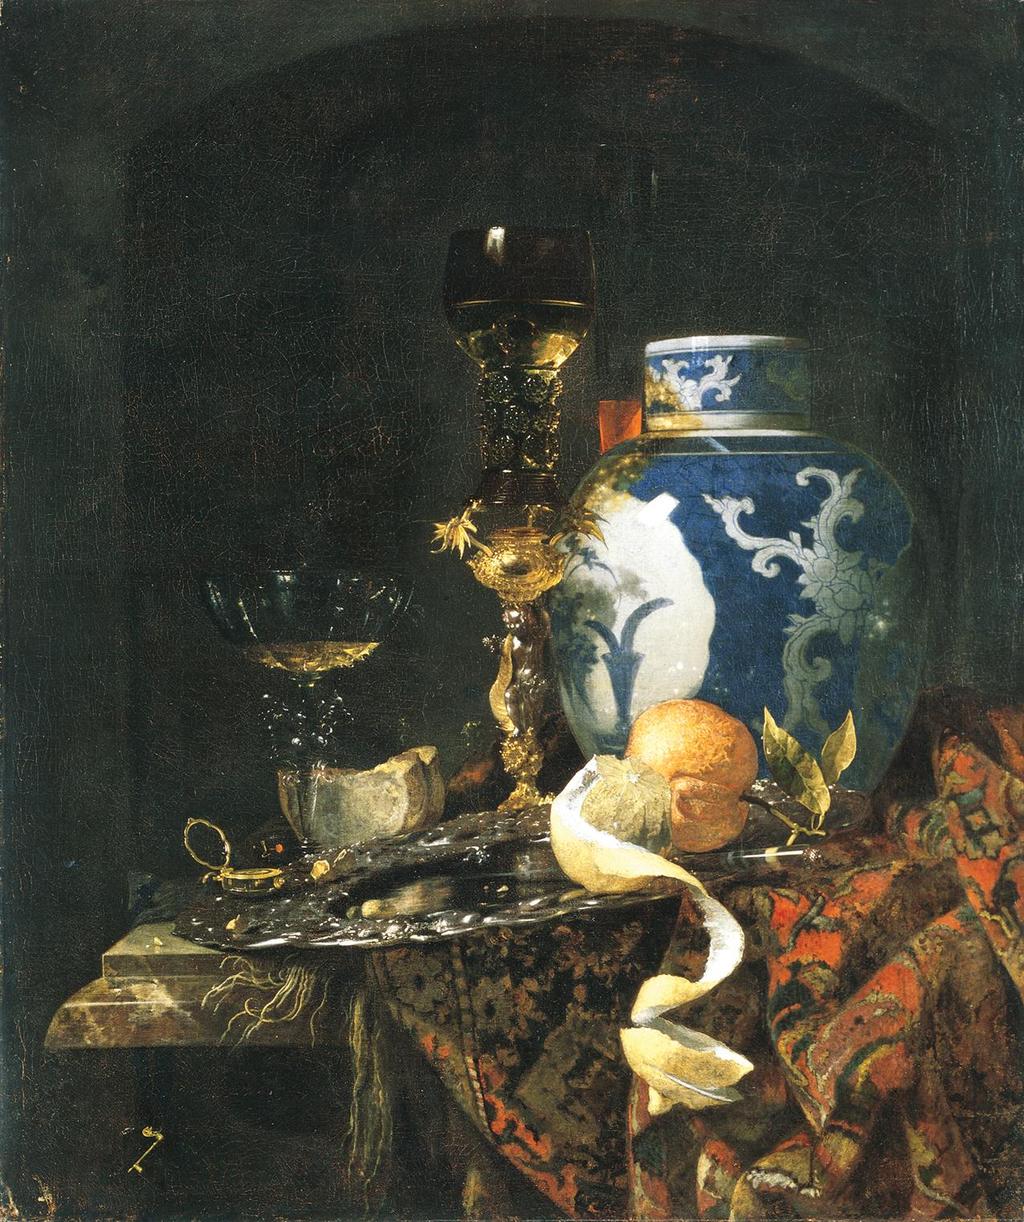 Figure 25-22 WILLEM KALF, Still Life with a Late Ming Ginger Jar, 1669. Oil on canvas, 2 6 x 2 1 3/4.